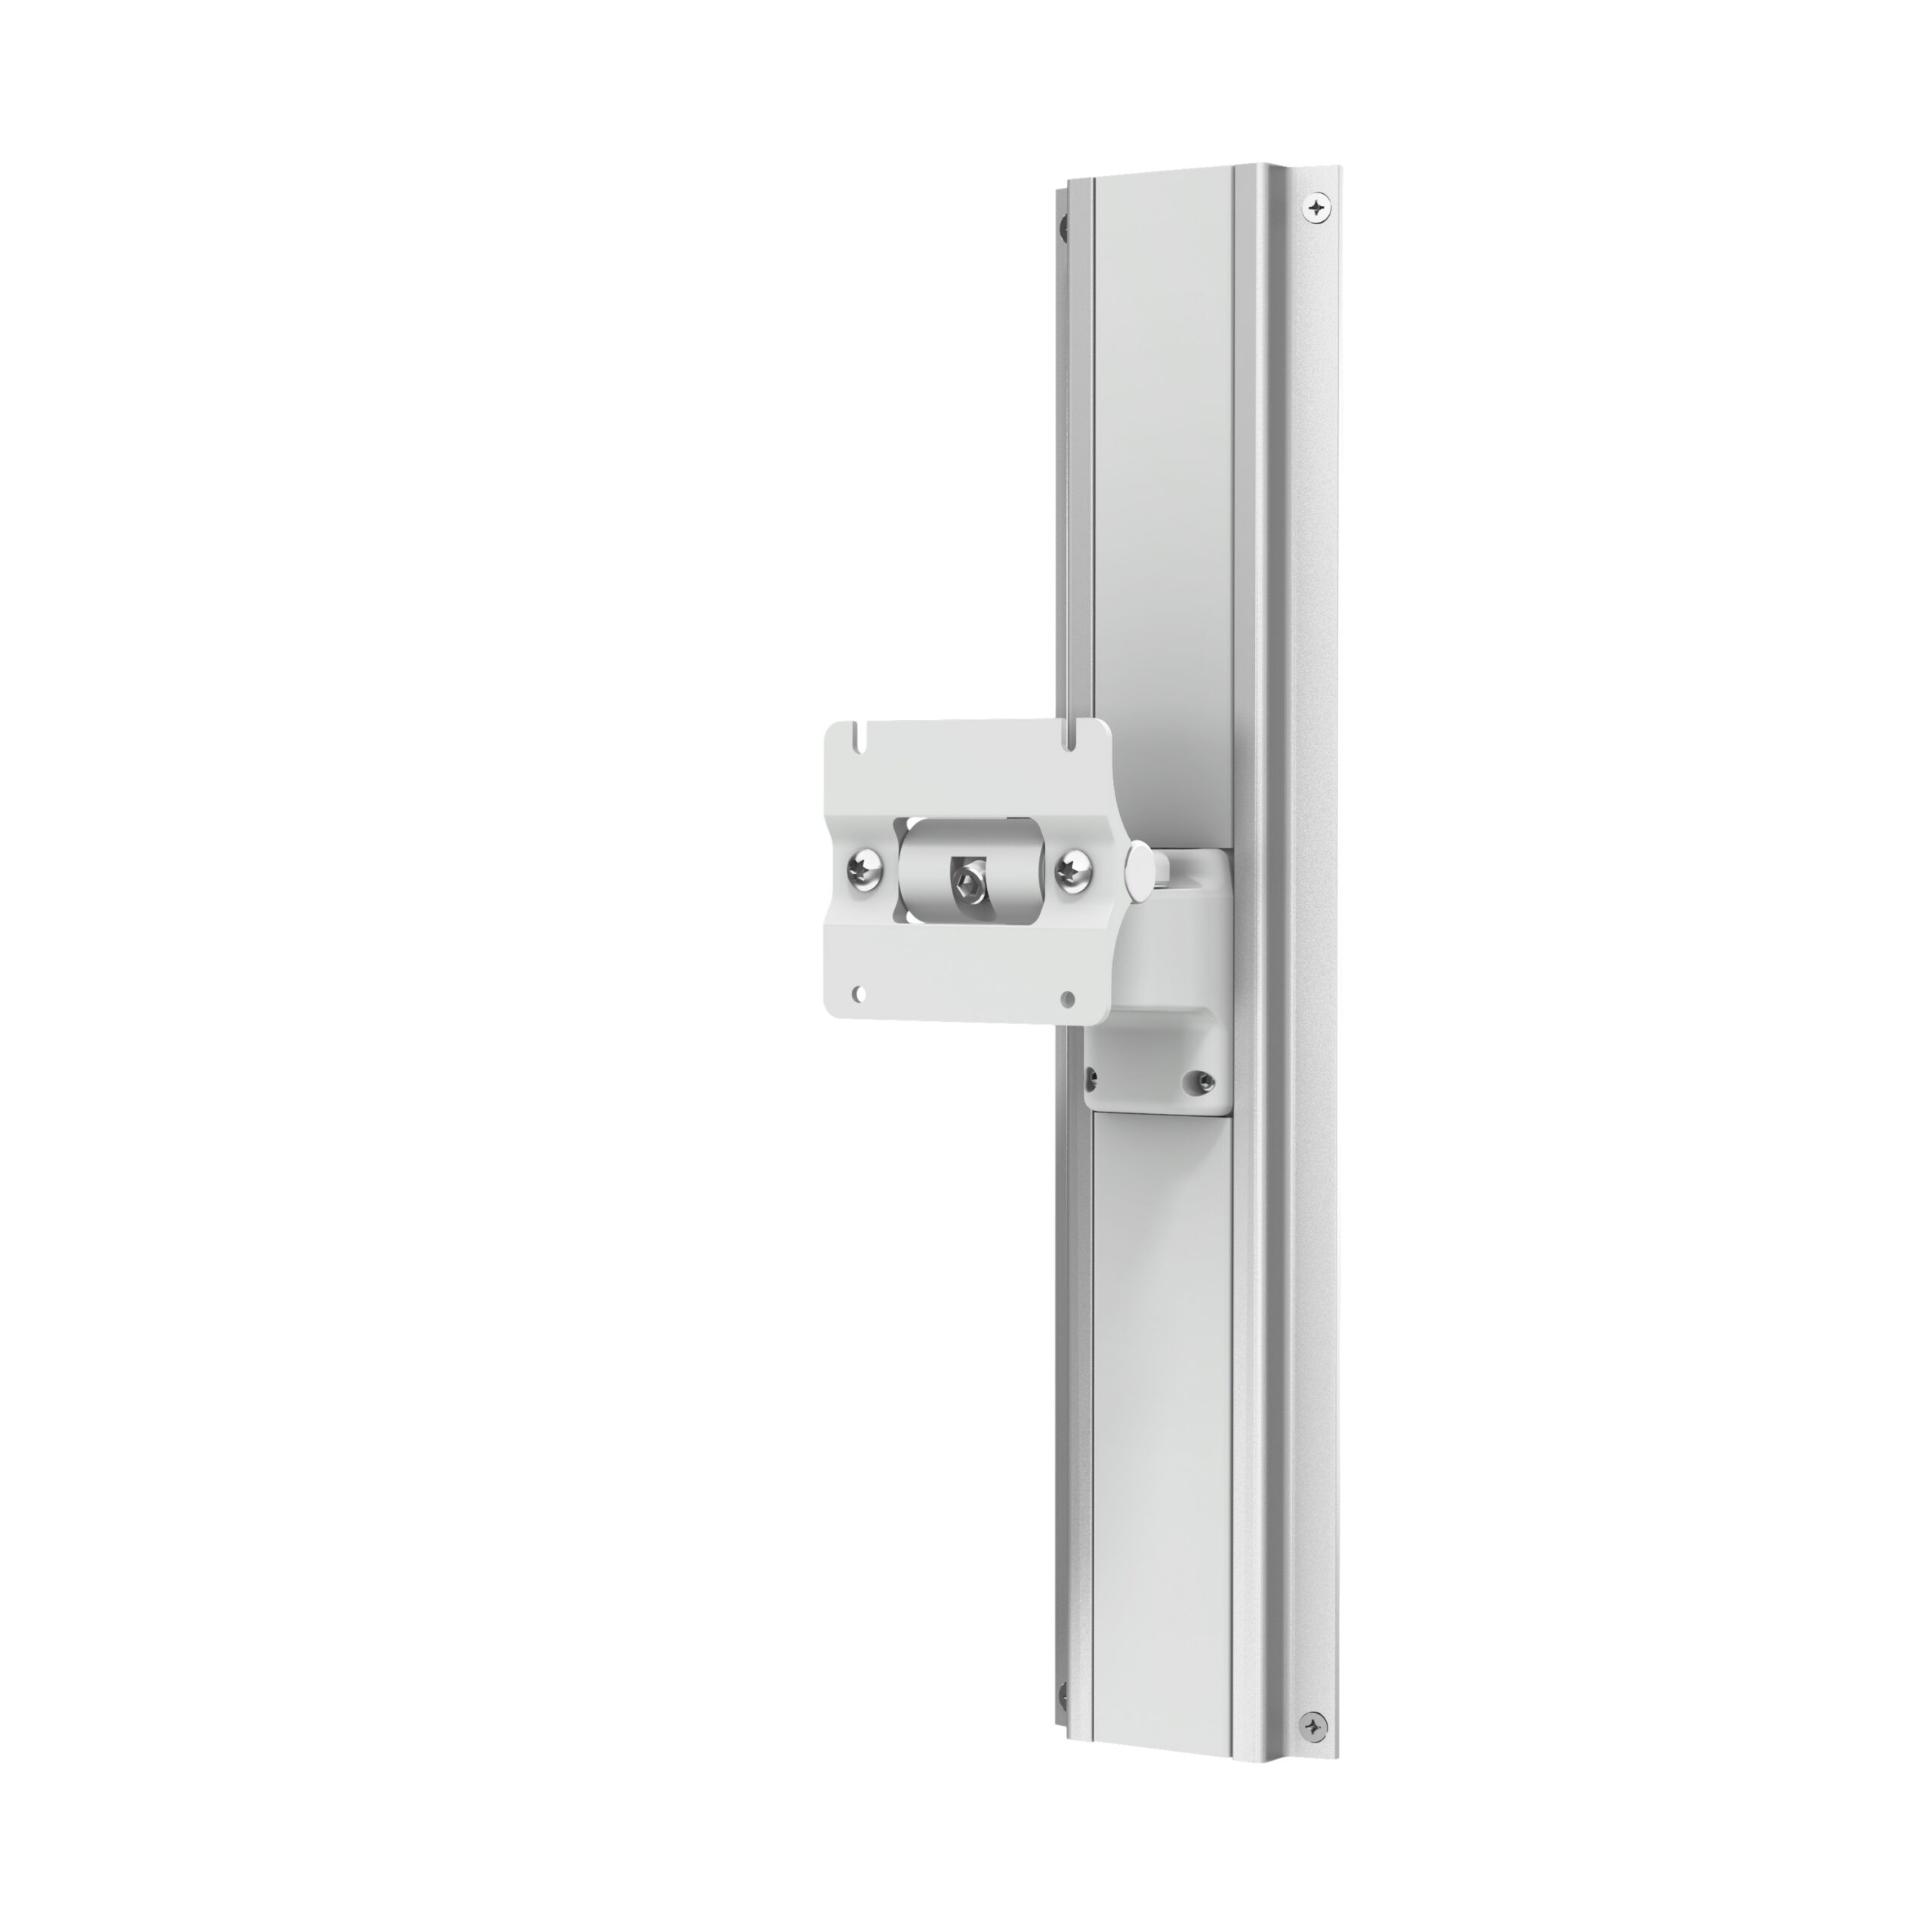 M Series Flush Mount with VESA Mounting Plate